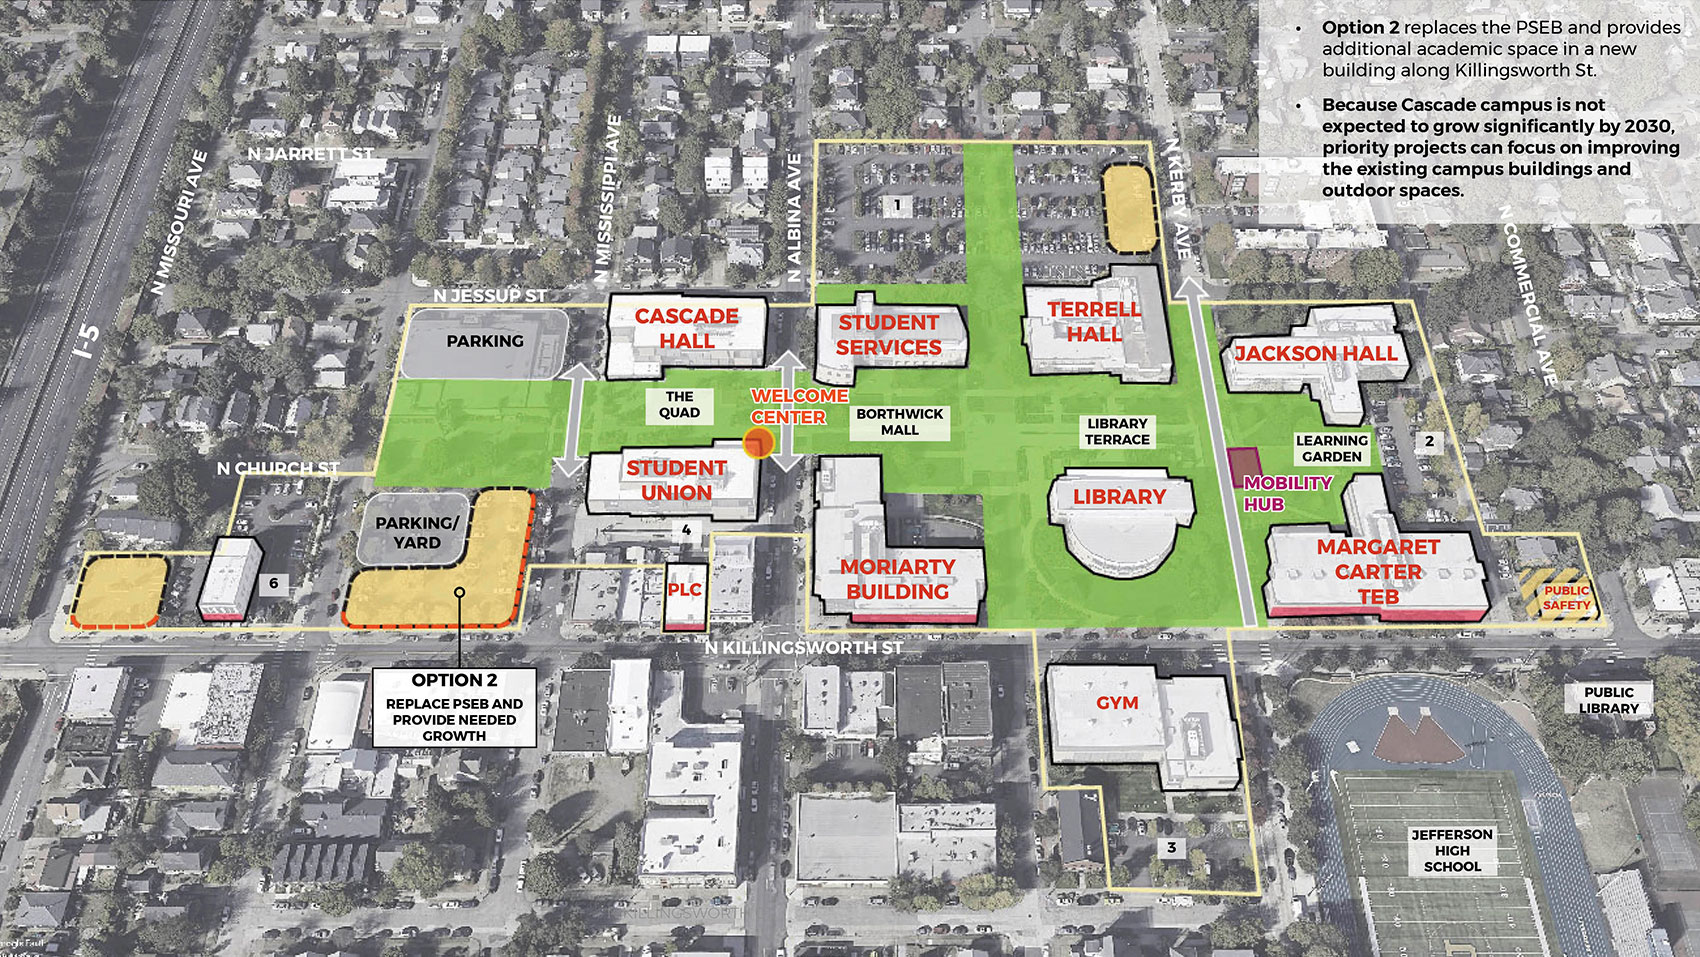 Option 2|The same aerial photograph view as shown in the Campus Planning Concept image. Three areas of the campus have an orange fill with a dashed black outline, indicating future development areas. At the top right of the image, a white box contains text reading: “Option two replaces the PSEB and provides additional academic space in a new building along Killingsworth Street. Because Cascade Campus is not expected to grow significantly by 2030, priority projects can focus on improving the existing campus buildings and outdoor spaces.” An orange area is shown in an L shape bordering Killingsworth Street between Michigan Avenue and Mississippi Avenue at the south and Mississippi Avenue across from the Moriarty Building at the east. It has bright red dashed edges along the streets, and its other edges are black. Tucked behind the L-shape is a grey area labeled “parking / yard”. The orange area is labeled “Option 2: Replace PSEB and provide needed growth.” The other parts of the drawing are the same as in Option One.